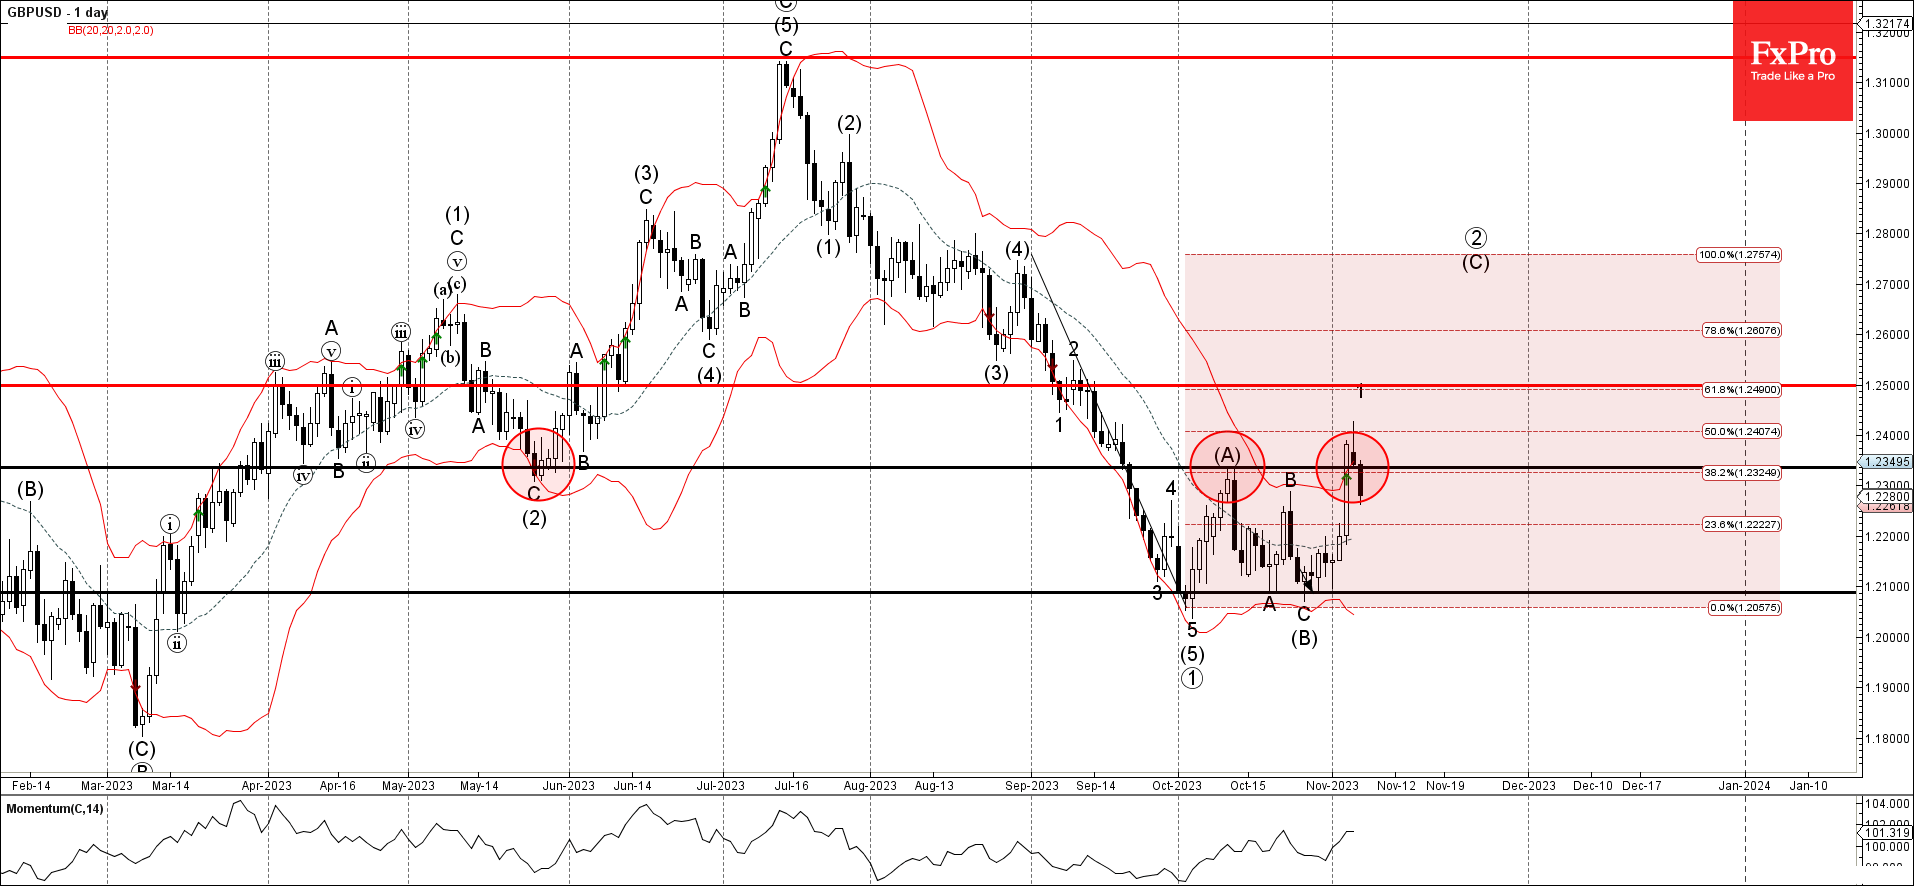 In-Depth GBPUSD Technical Analysis and Projection